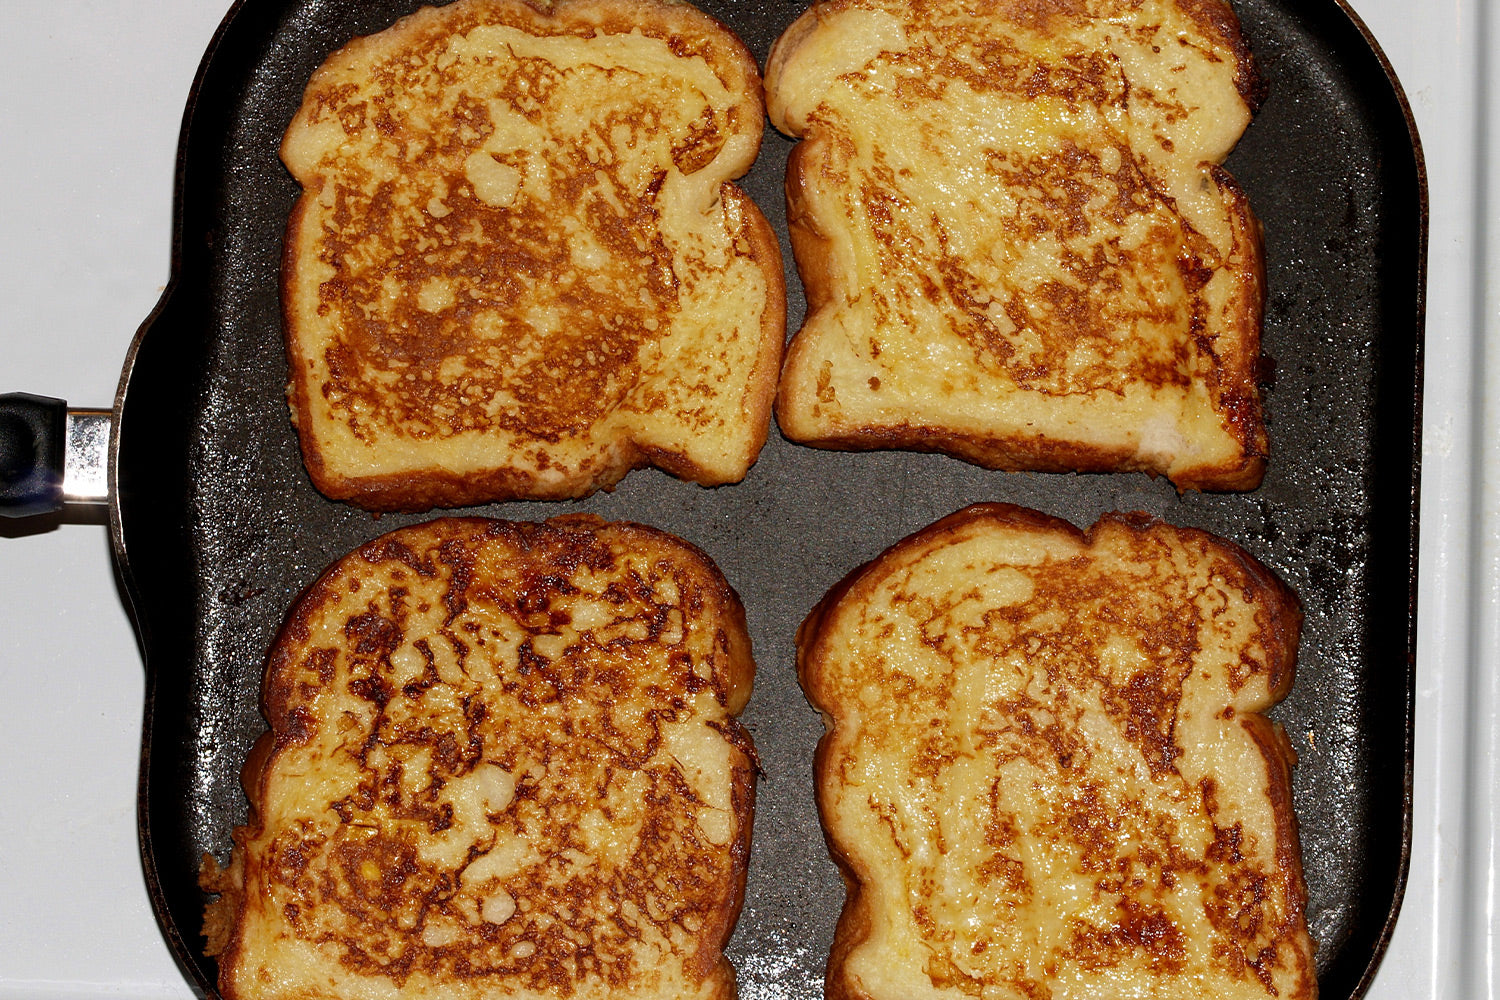 French toast cooking on a stovetop